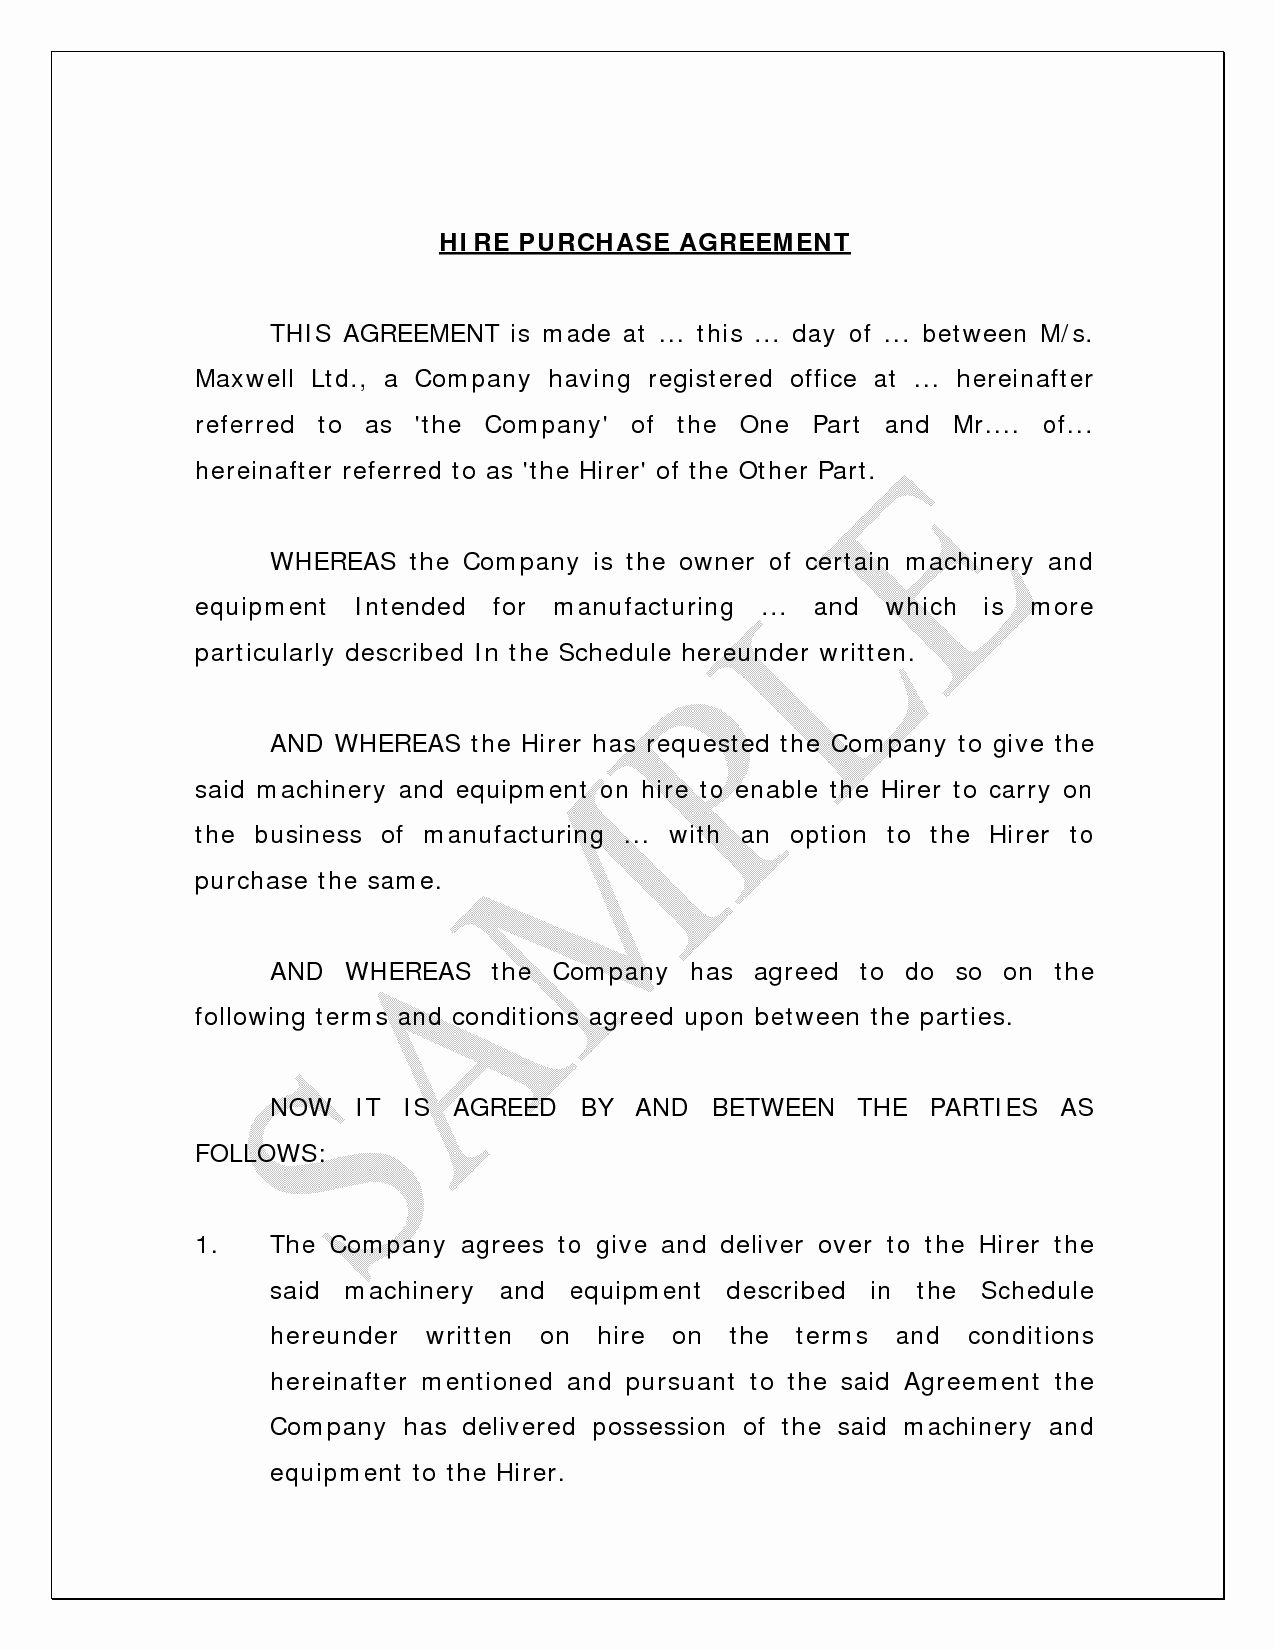 Work for Hire Agreement Template Beautiful Sample Of A Hire Purchase Agreement Classtalkers